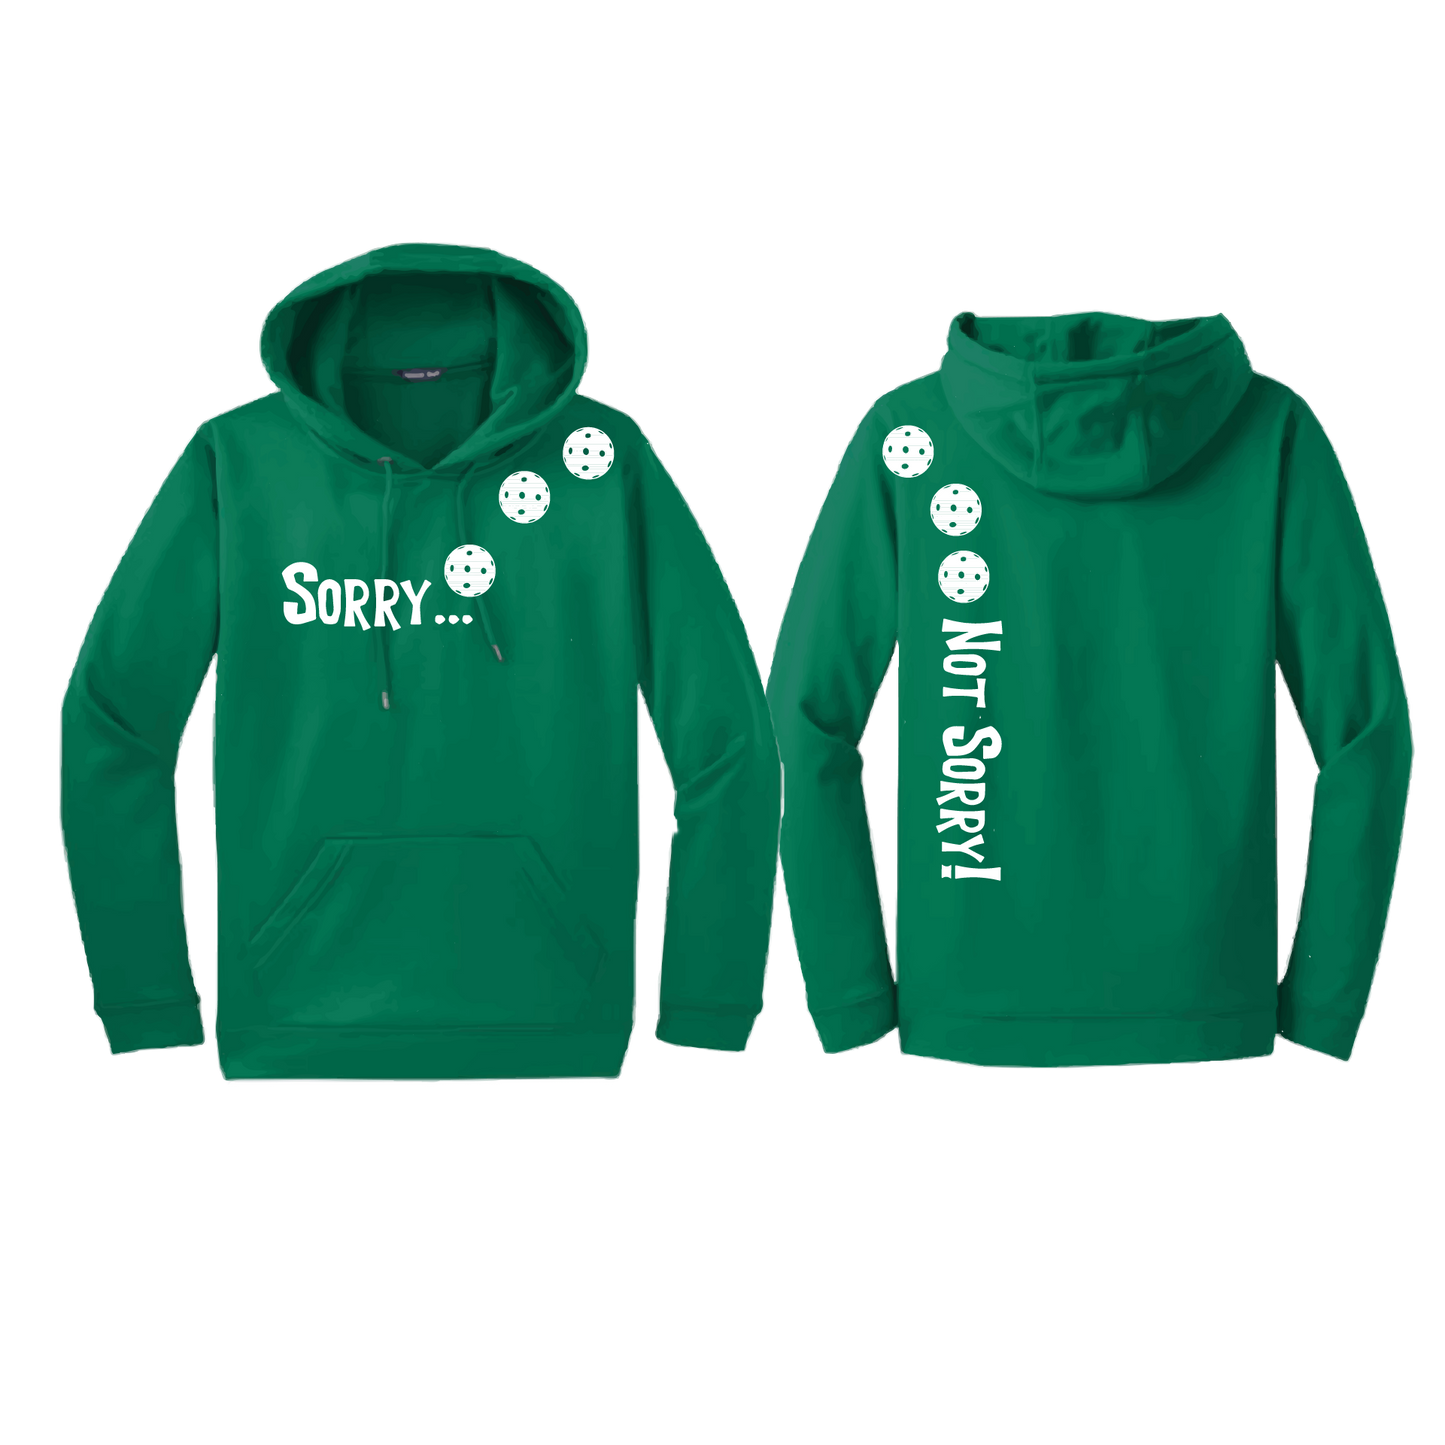 Pickleball Design: Sorry...Not Sorry!!! with Customizable Ball Color – White, Green, Yellow or Pink Balls. Unisex Hooded Sweatshirt: Moisture-wicking, double-lined hood, front pouch pocket. This unisex hooded sweatshirt is comfortable and soft. Stay warm on the Pickleball courts while being that hit with this one of kind design.